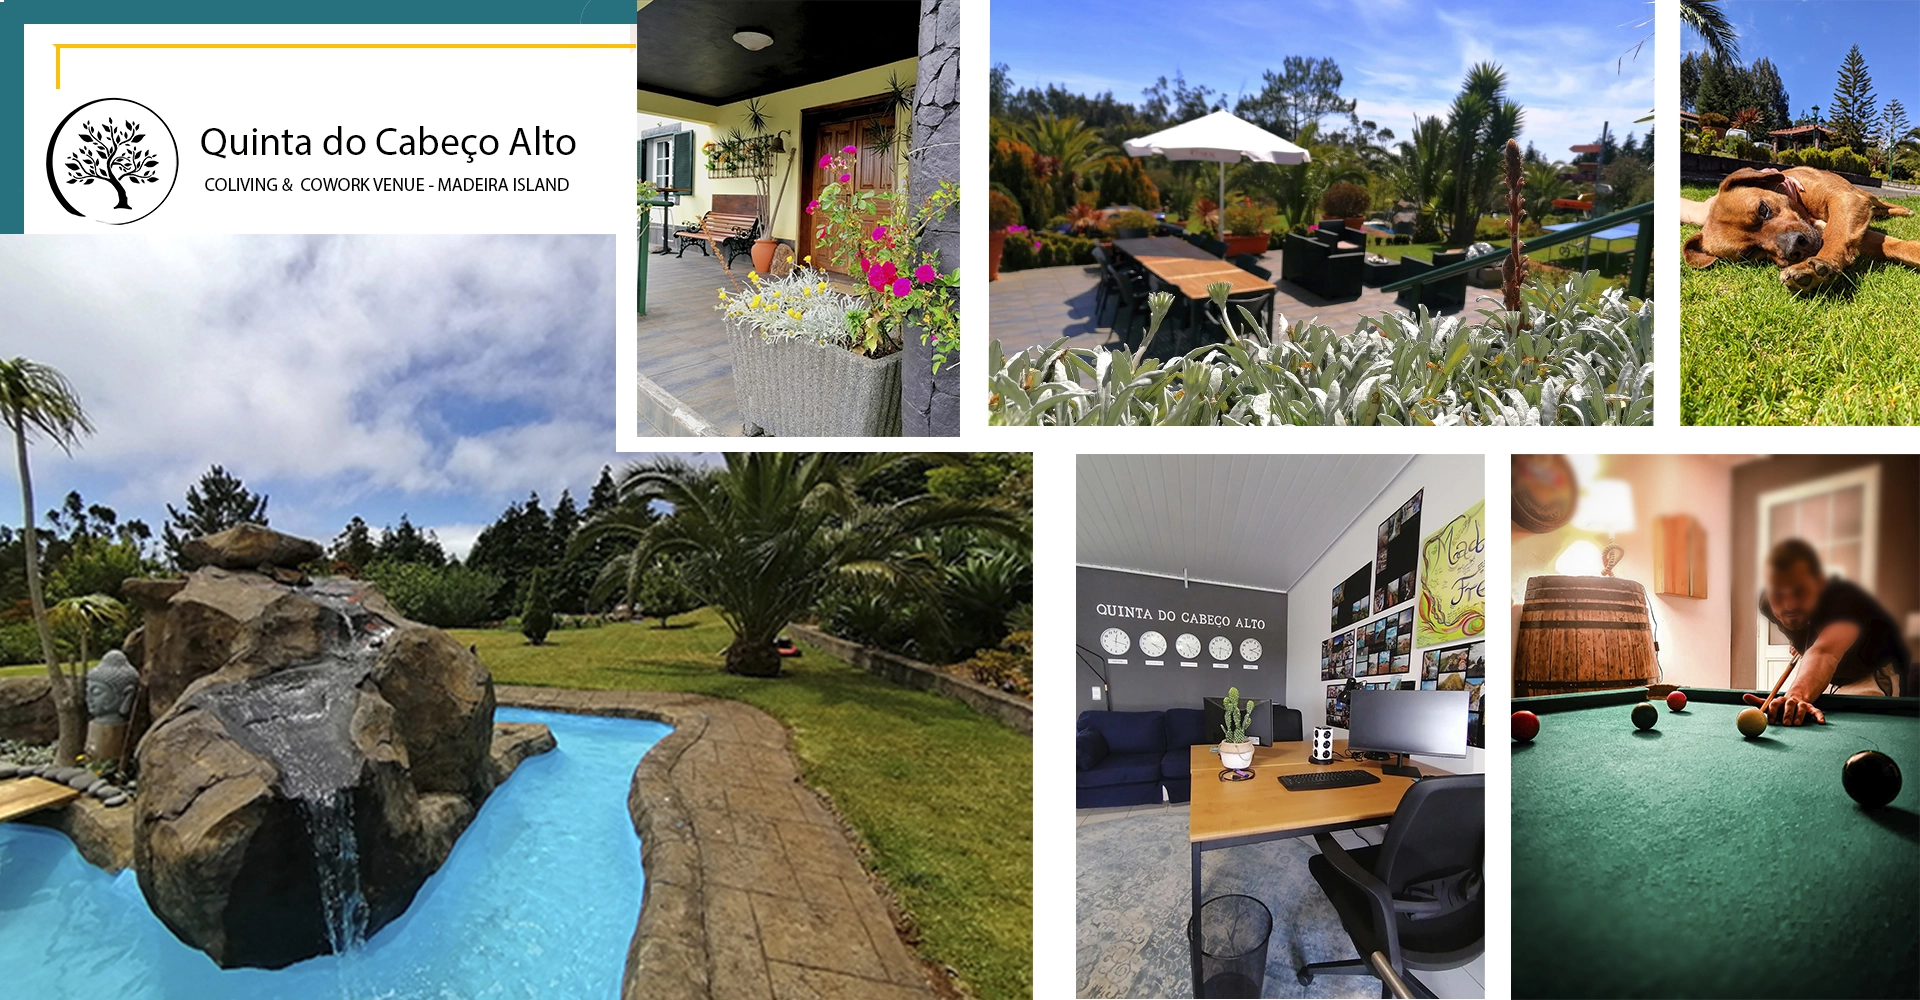 Coliving and Coworking Venue in Madeira at Quinta do Cabeço Alto